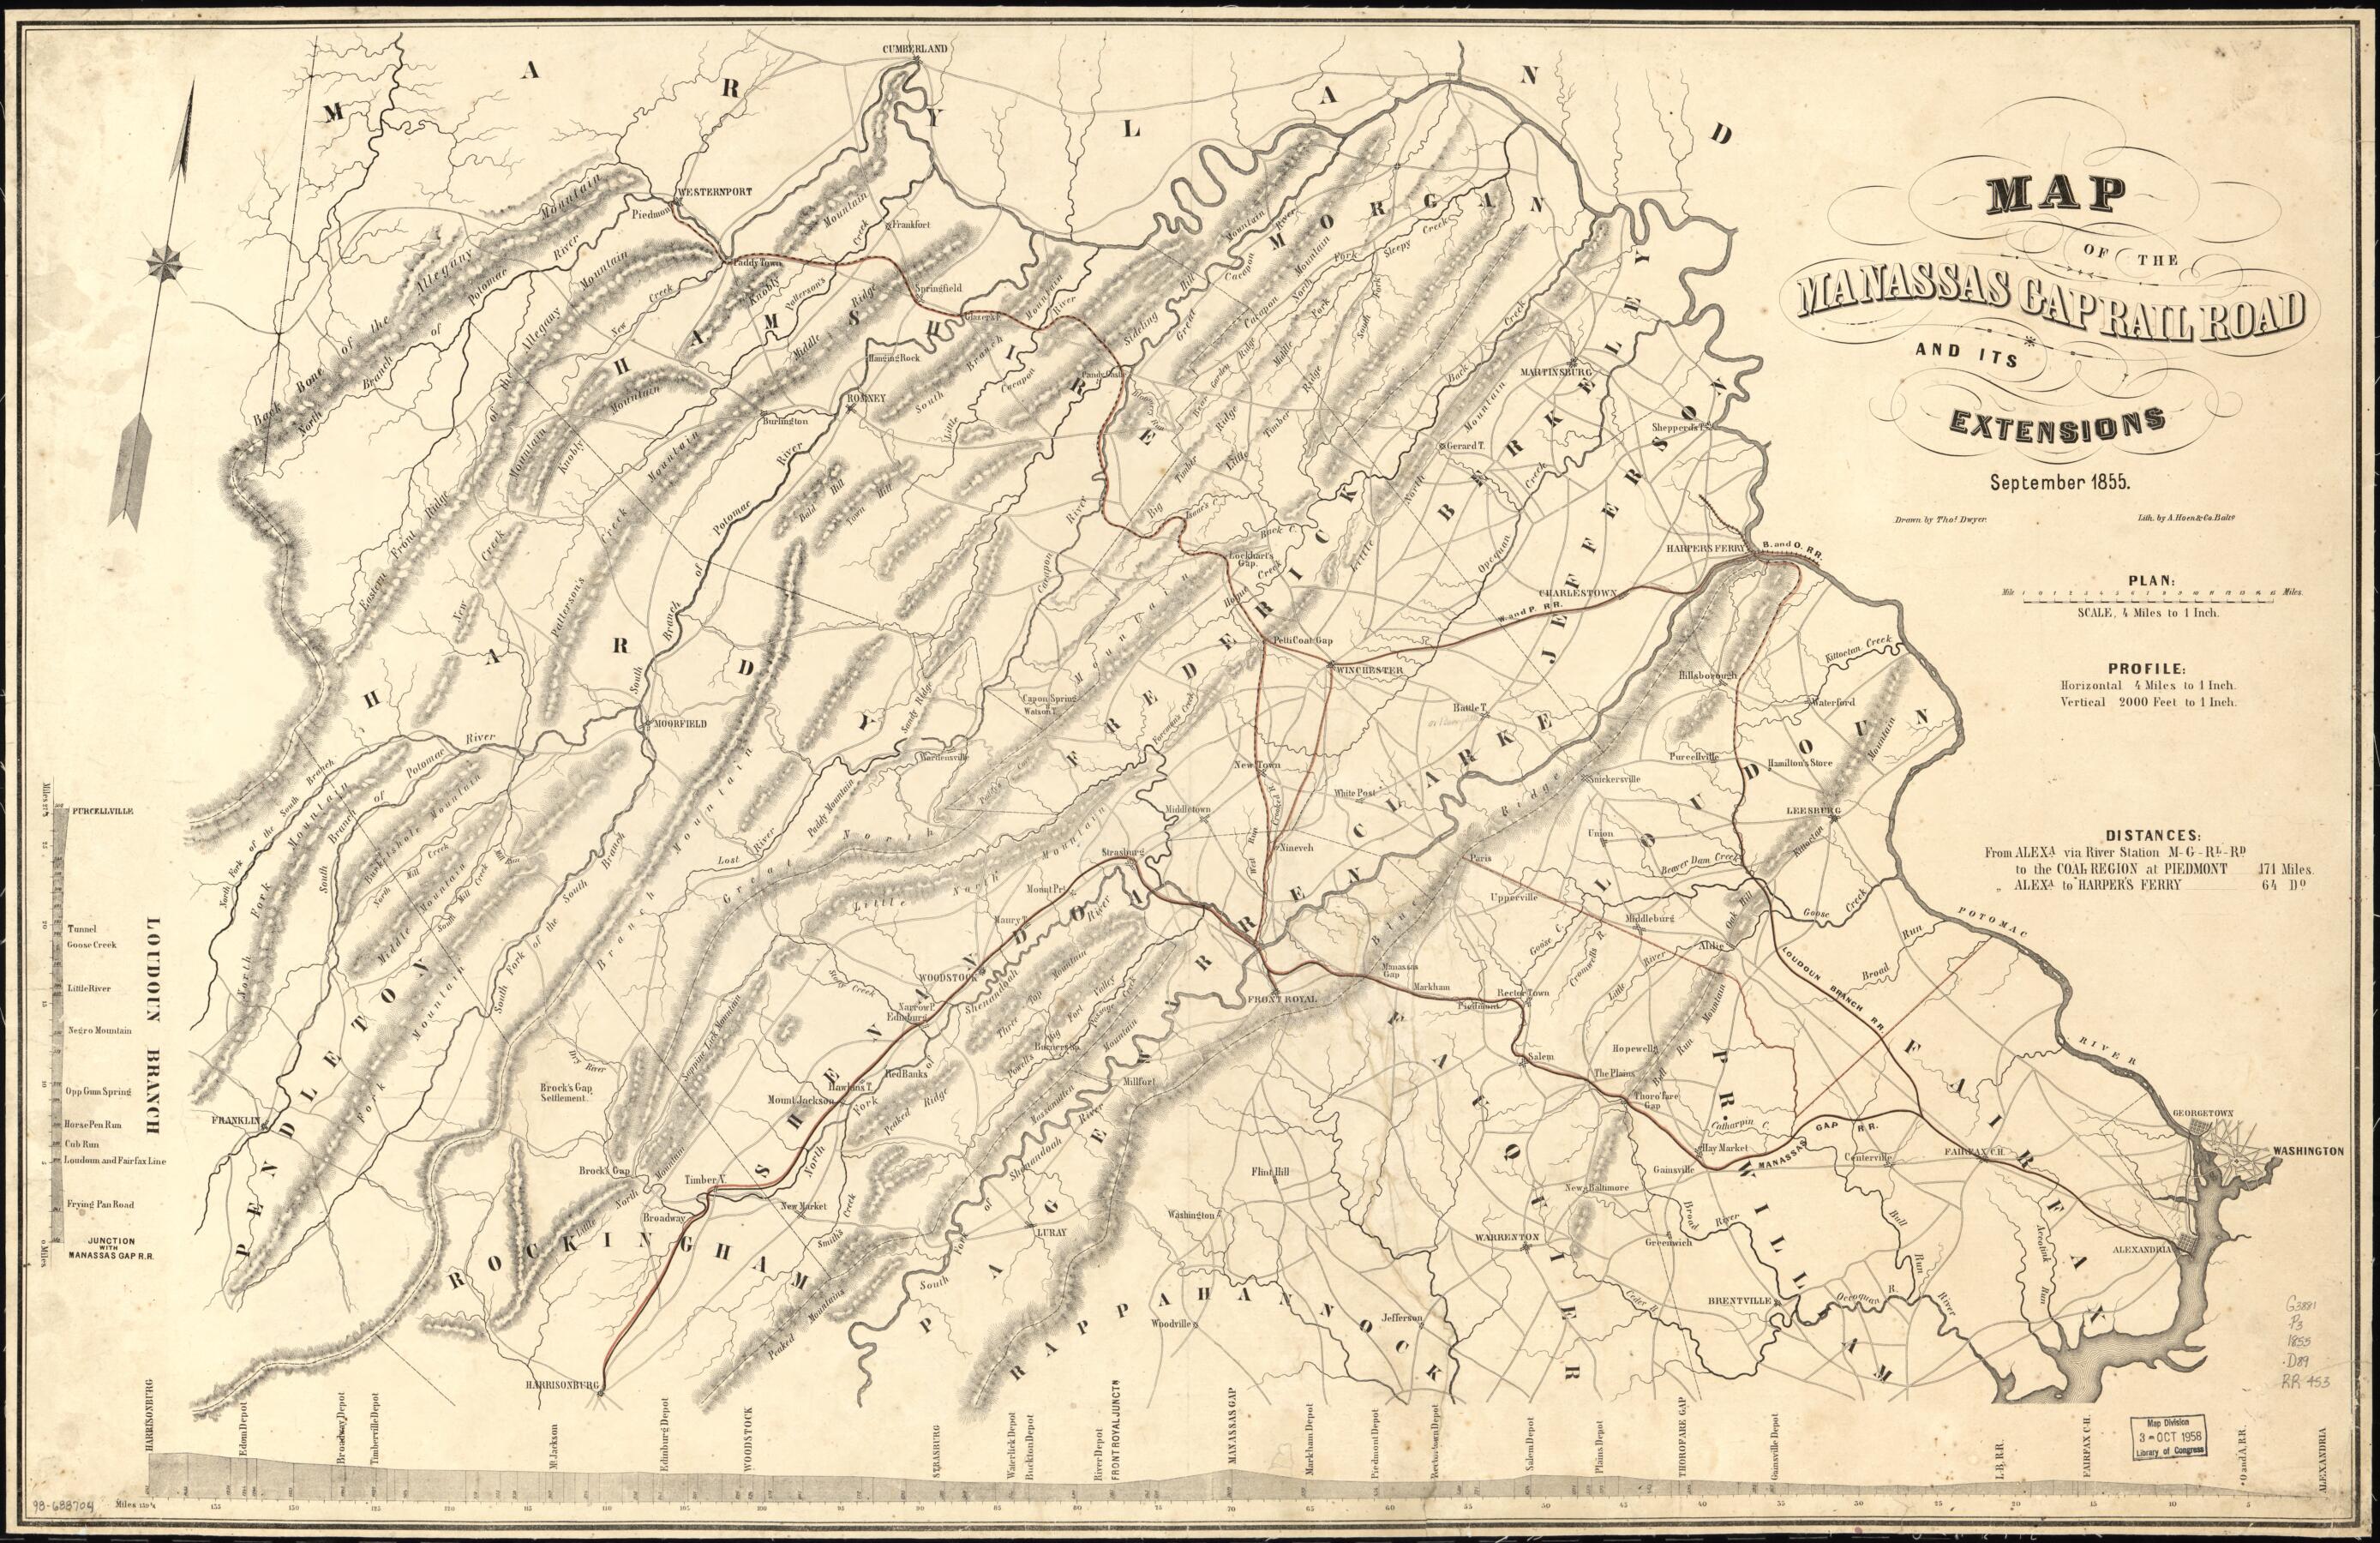 This old map of Map of the Manassas Gap Railroad and Its Extensions; September, from 1855 was created by Thomas Dwyer,  Manassas Gap Railroad Company in 1855